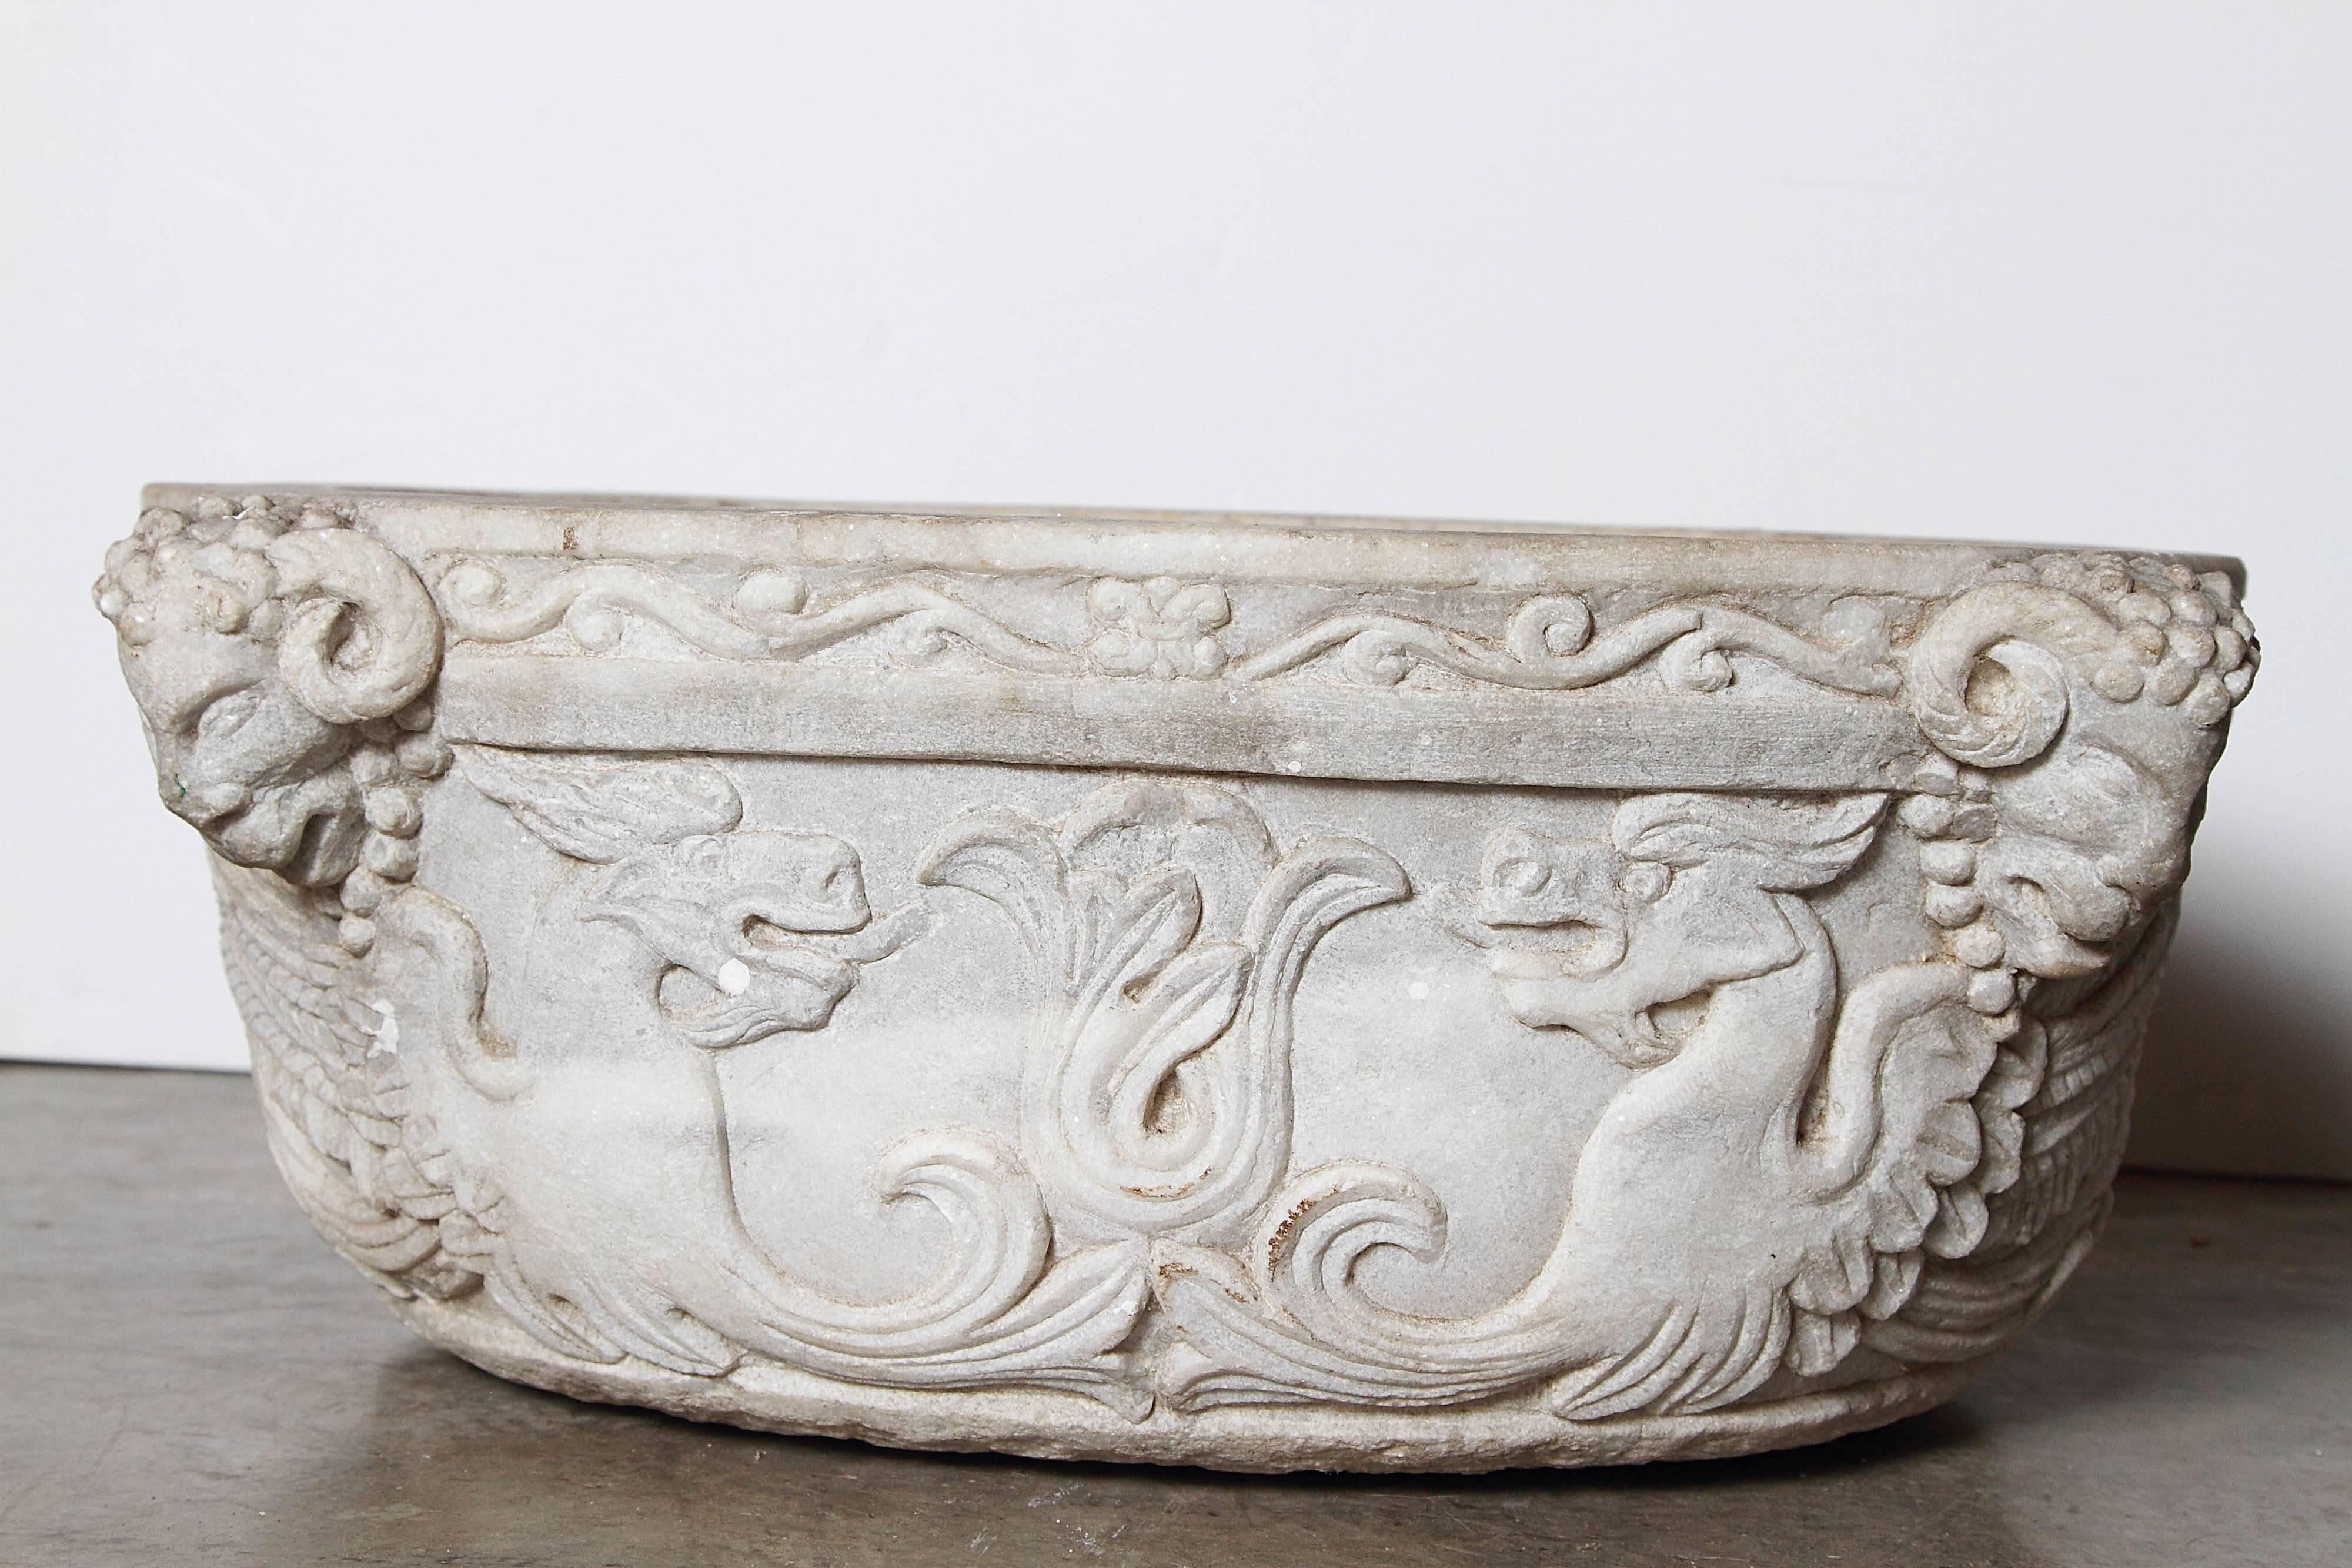 This elegant antique Italian white marble holy water vessel dates to the late 1700’s or early 1800’s. It has been carved out of one entire large piece of stone.  The marble has beautifully carved motifs depicting a mascaron with ram’s horns, a